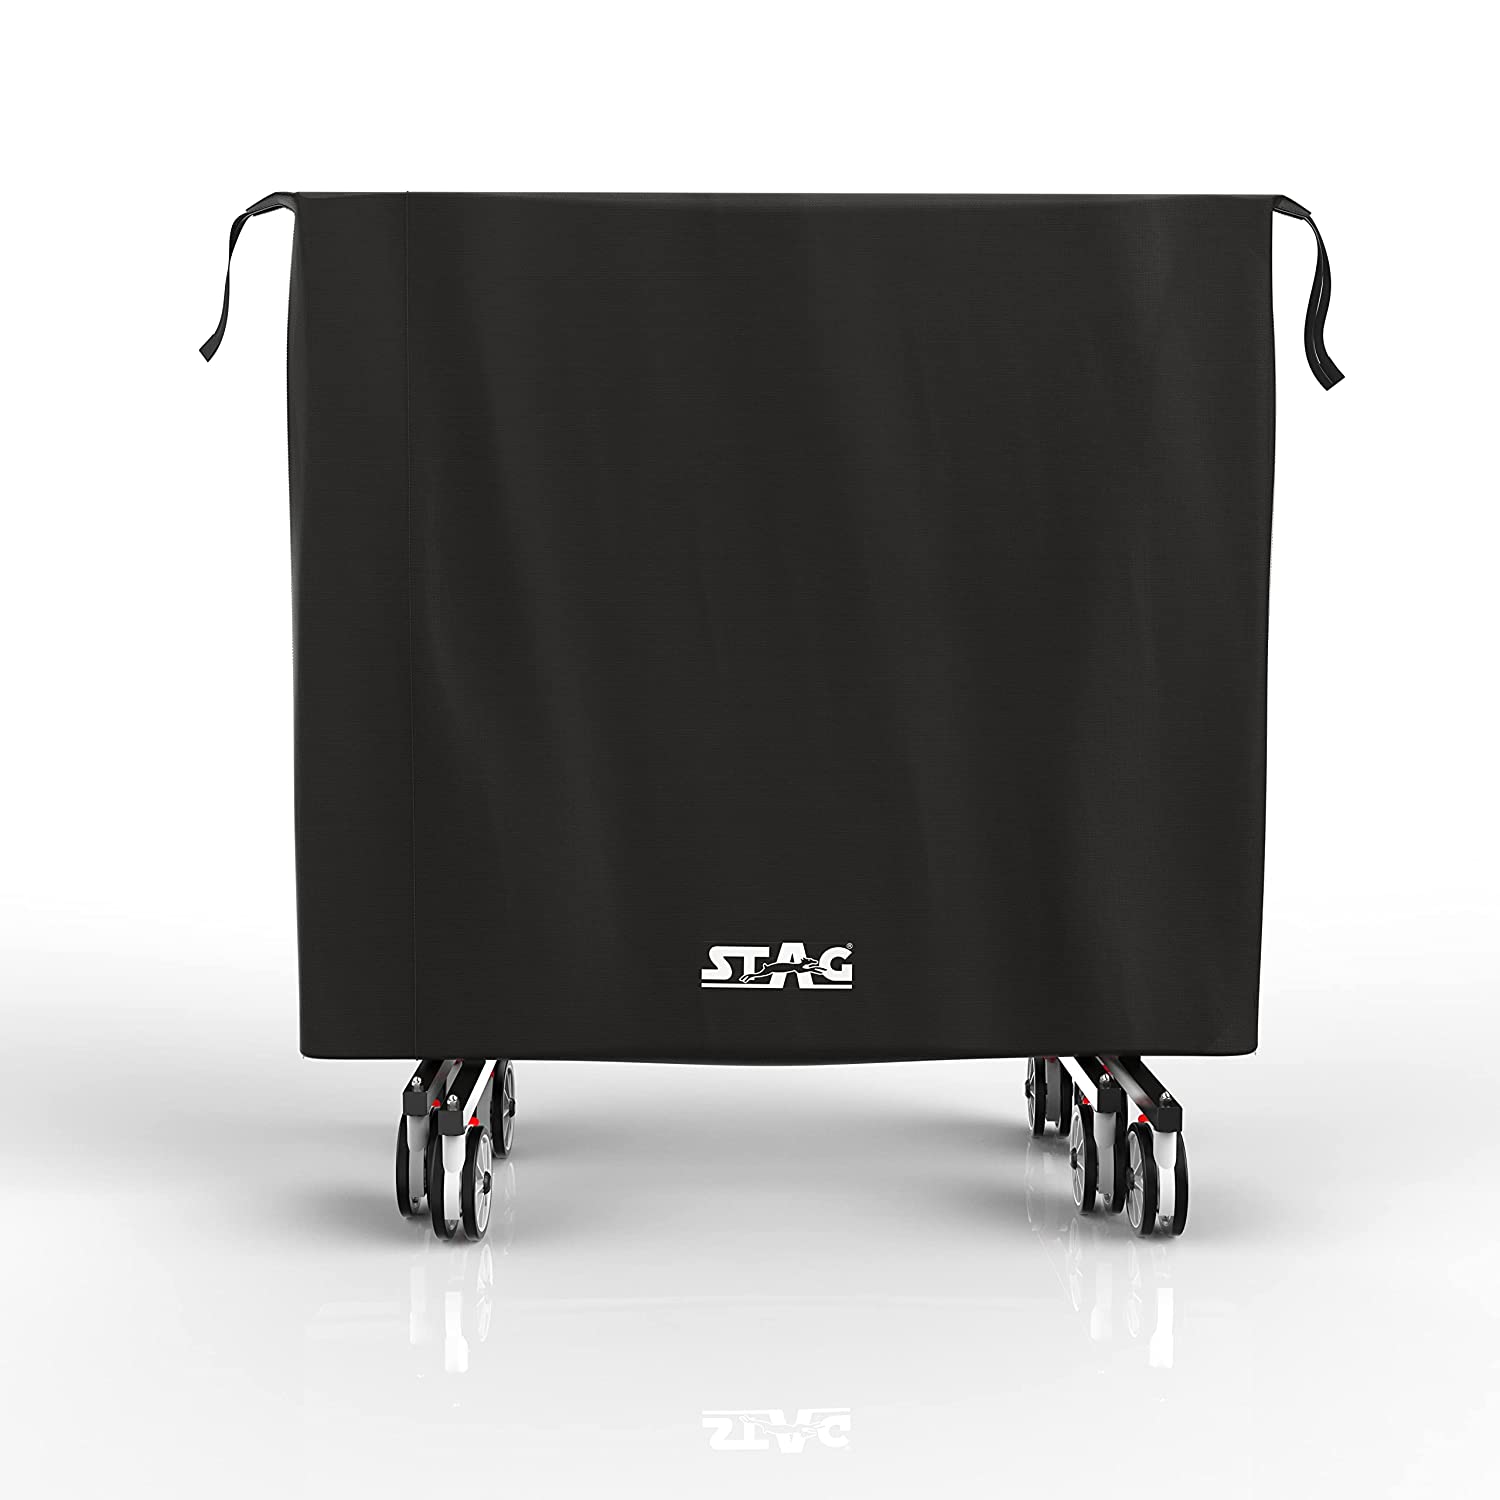 STAG Ping Pong 2 in 1Table Cover Fits Both Folding Tables & Flat Tables - Indoor & Outdoor